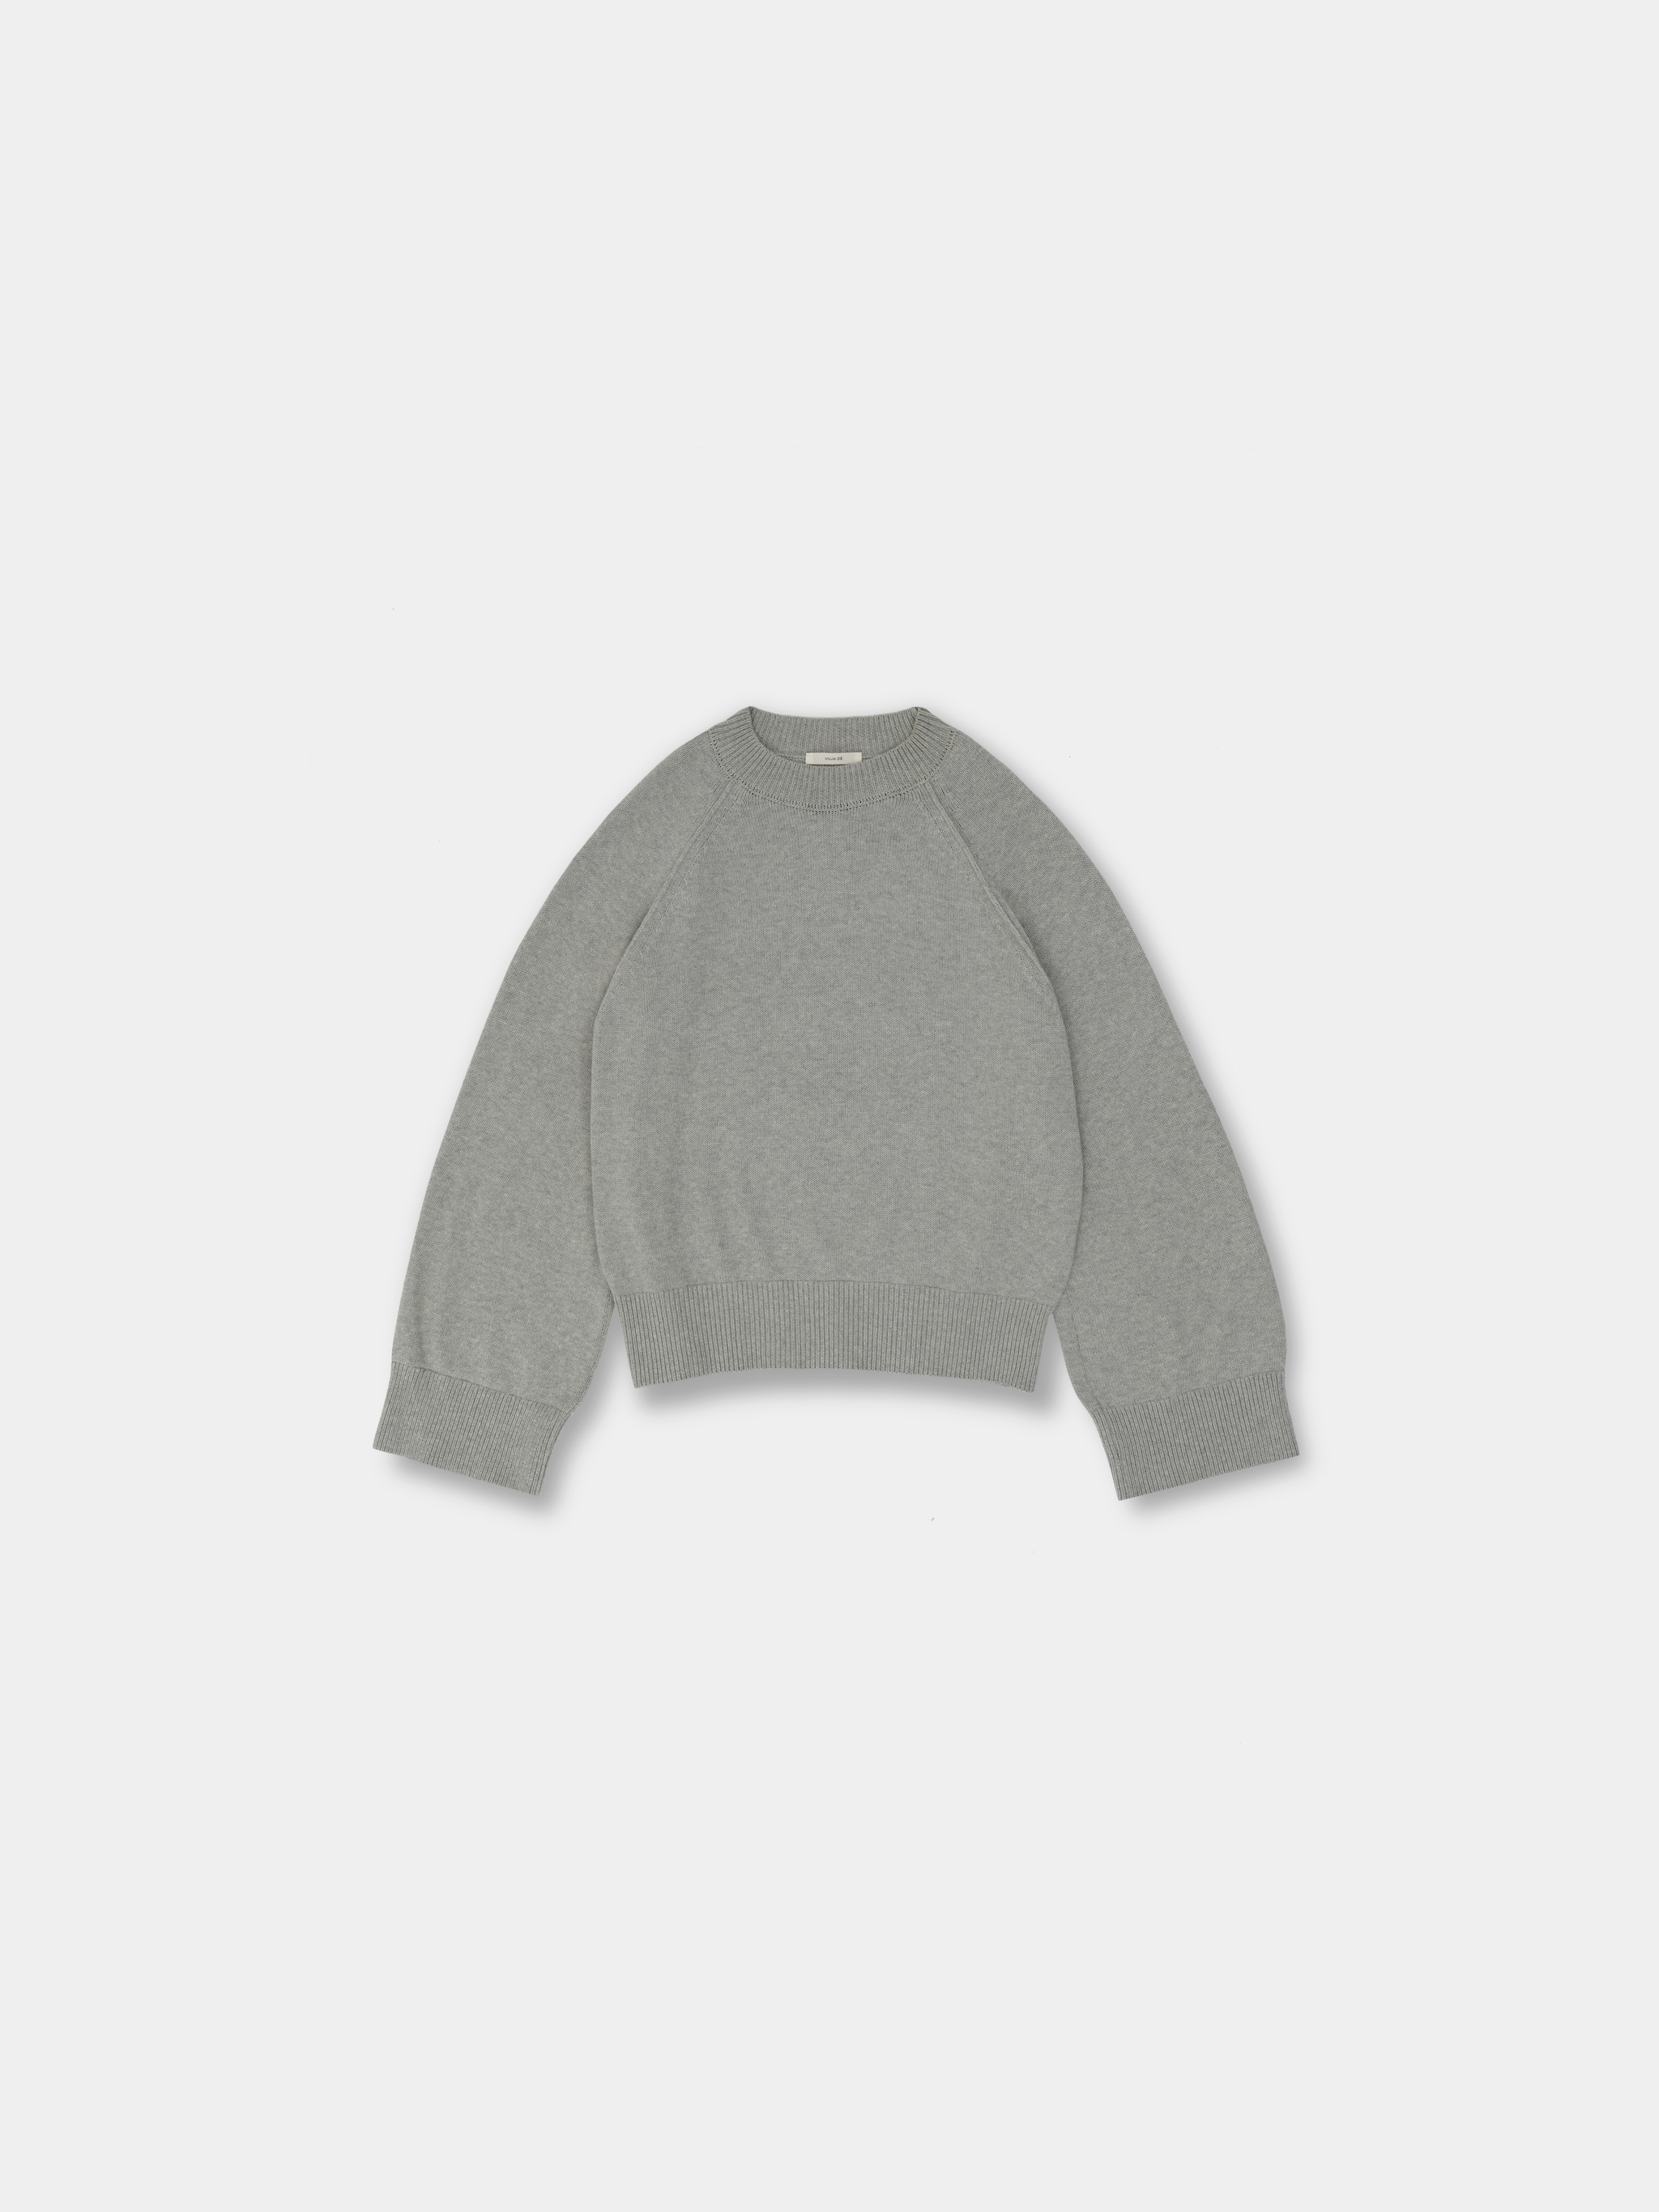 The “Piege” Cashmere Blend Sweater in whisper grey